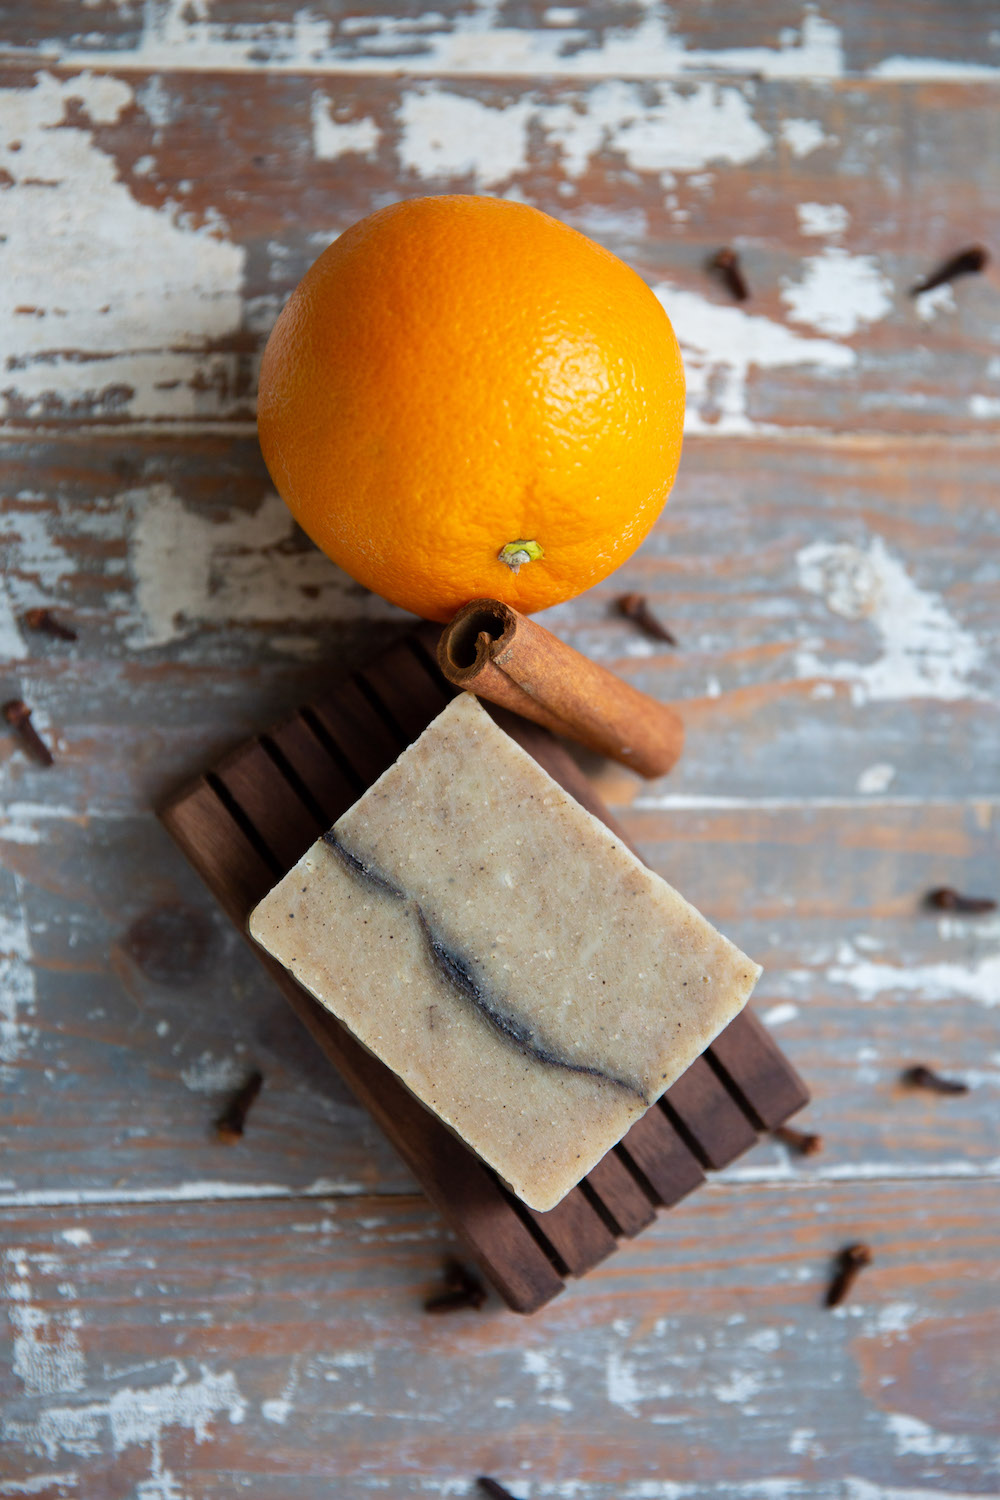 freedom soaps fall product photography - sweet orange and cinnamon soaps.jpg